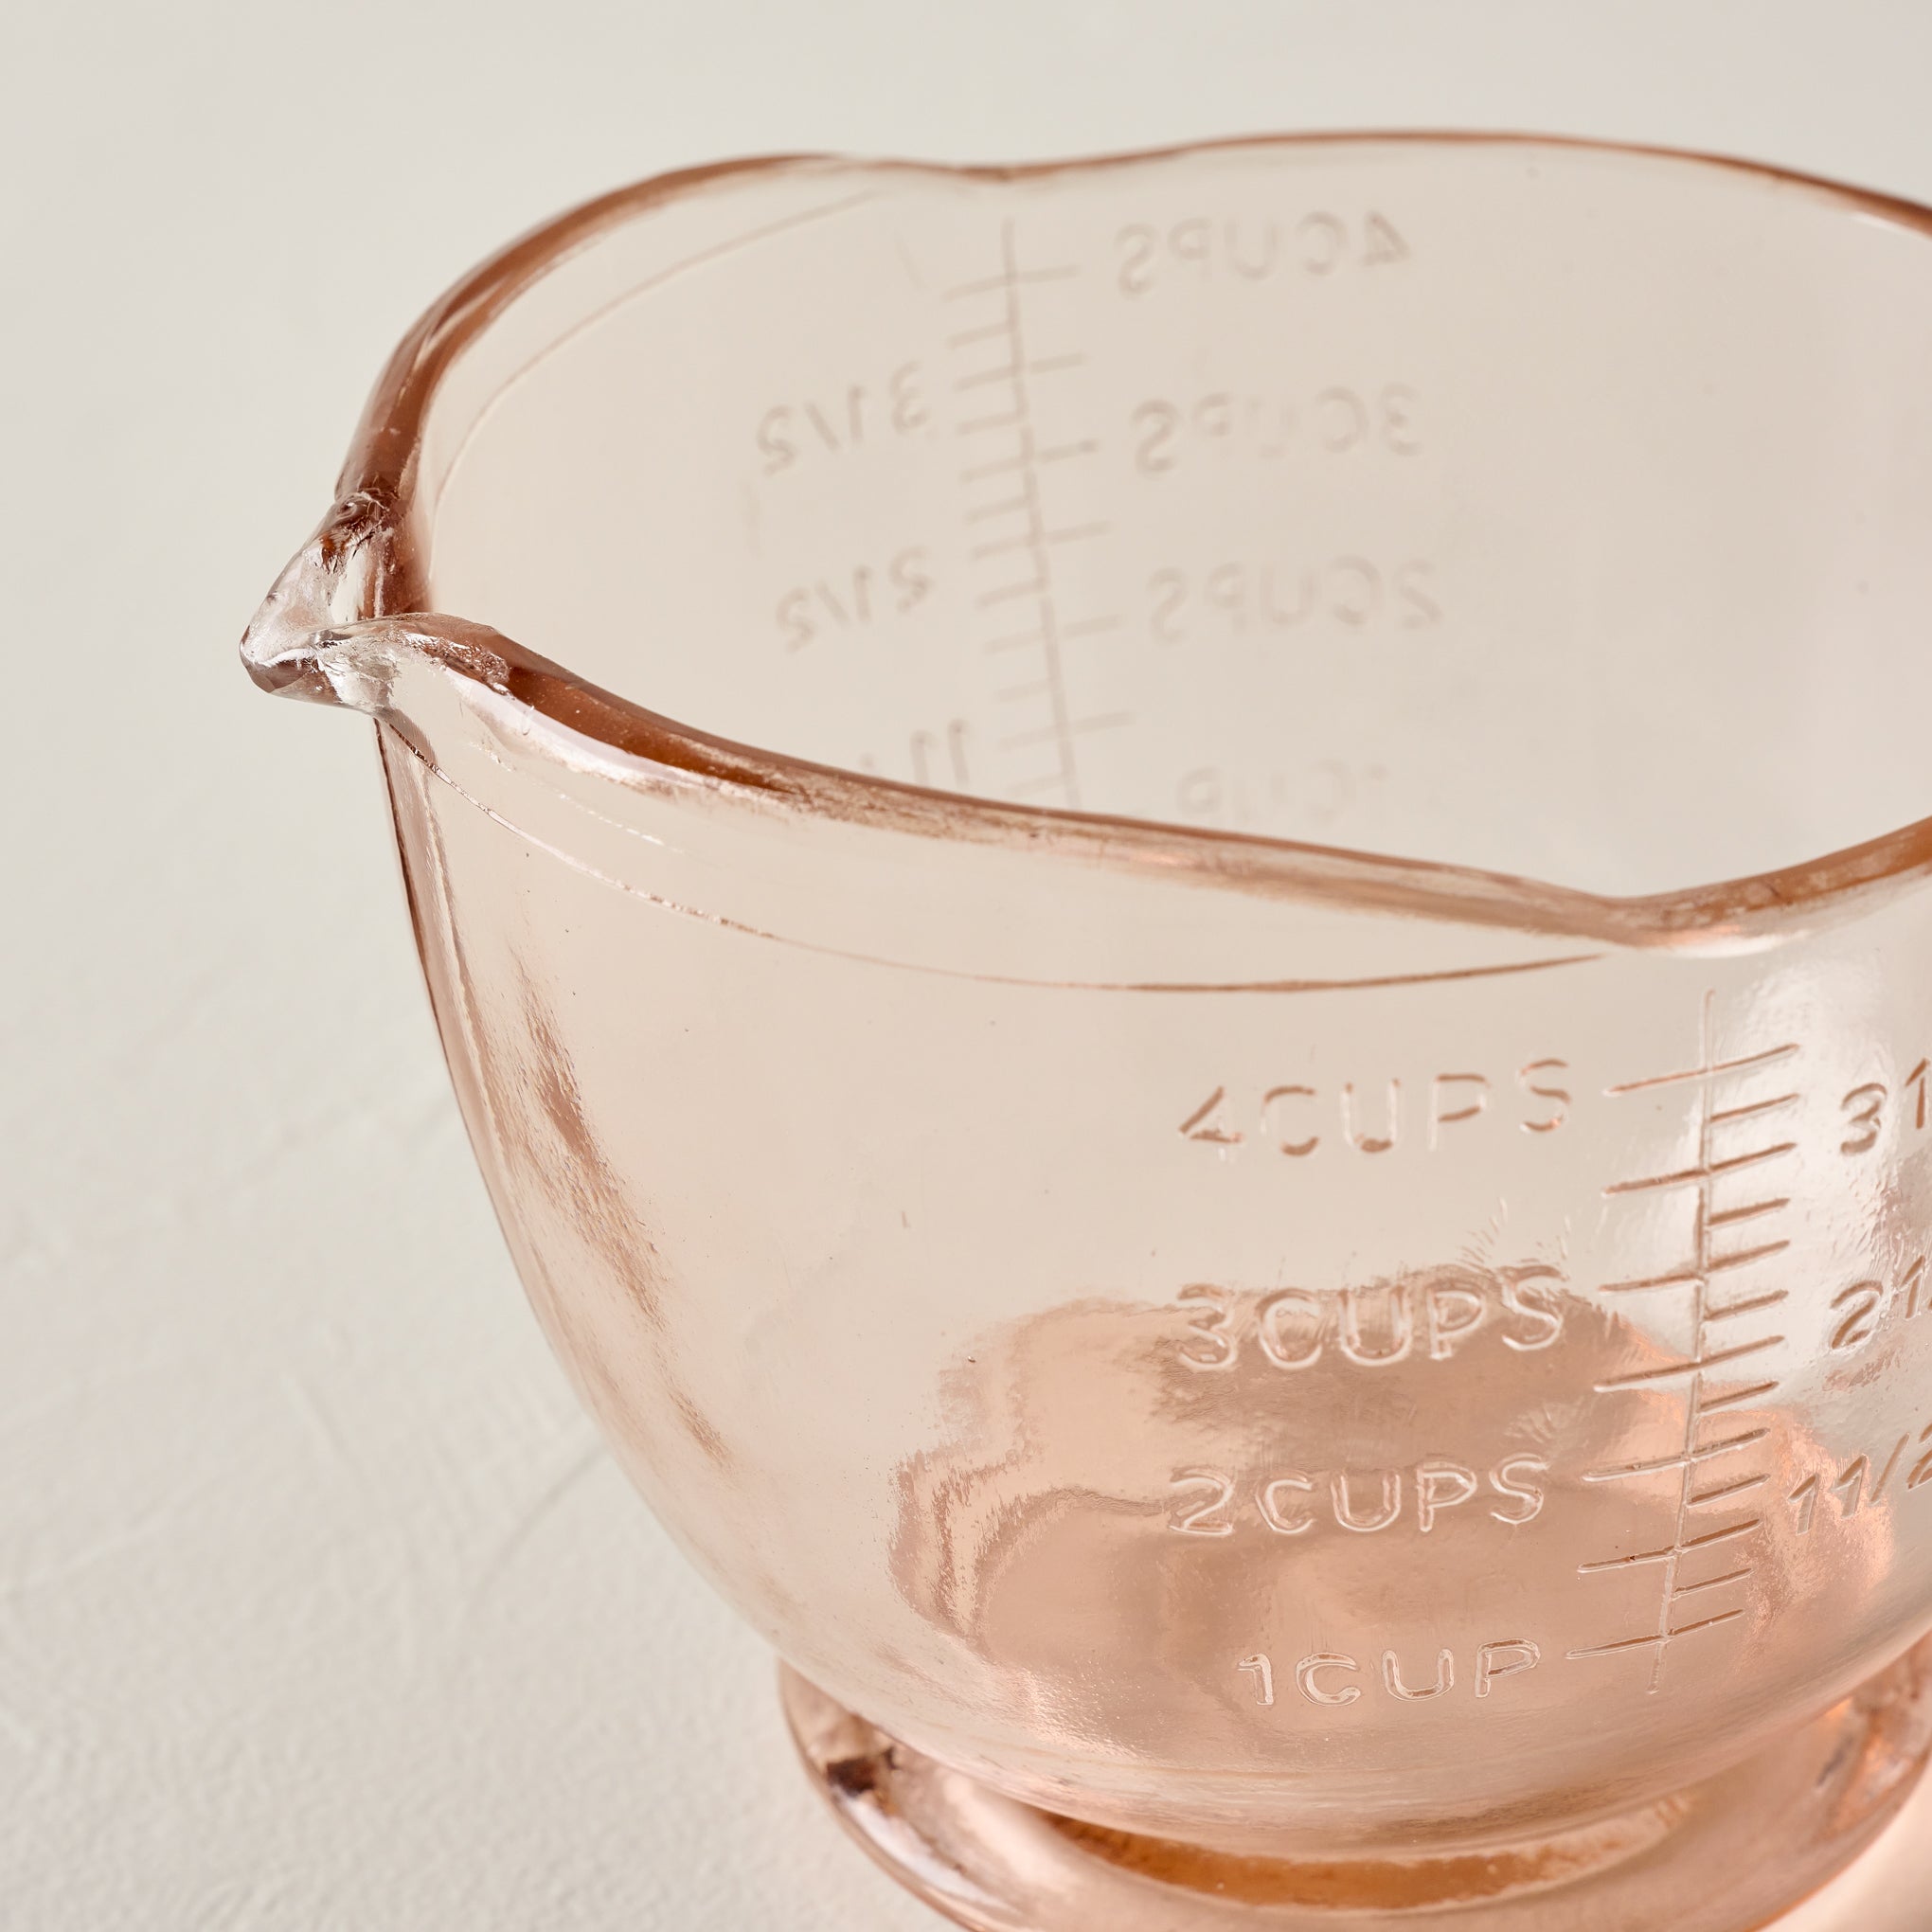 Anchor Hocking Measuring Cup, 4 Cup Capacity 